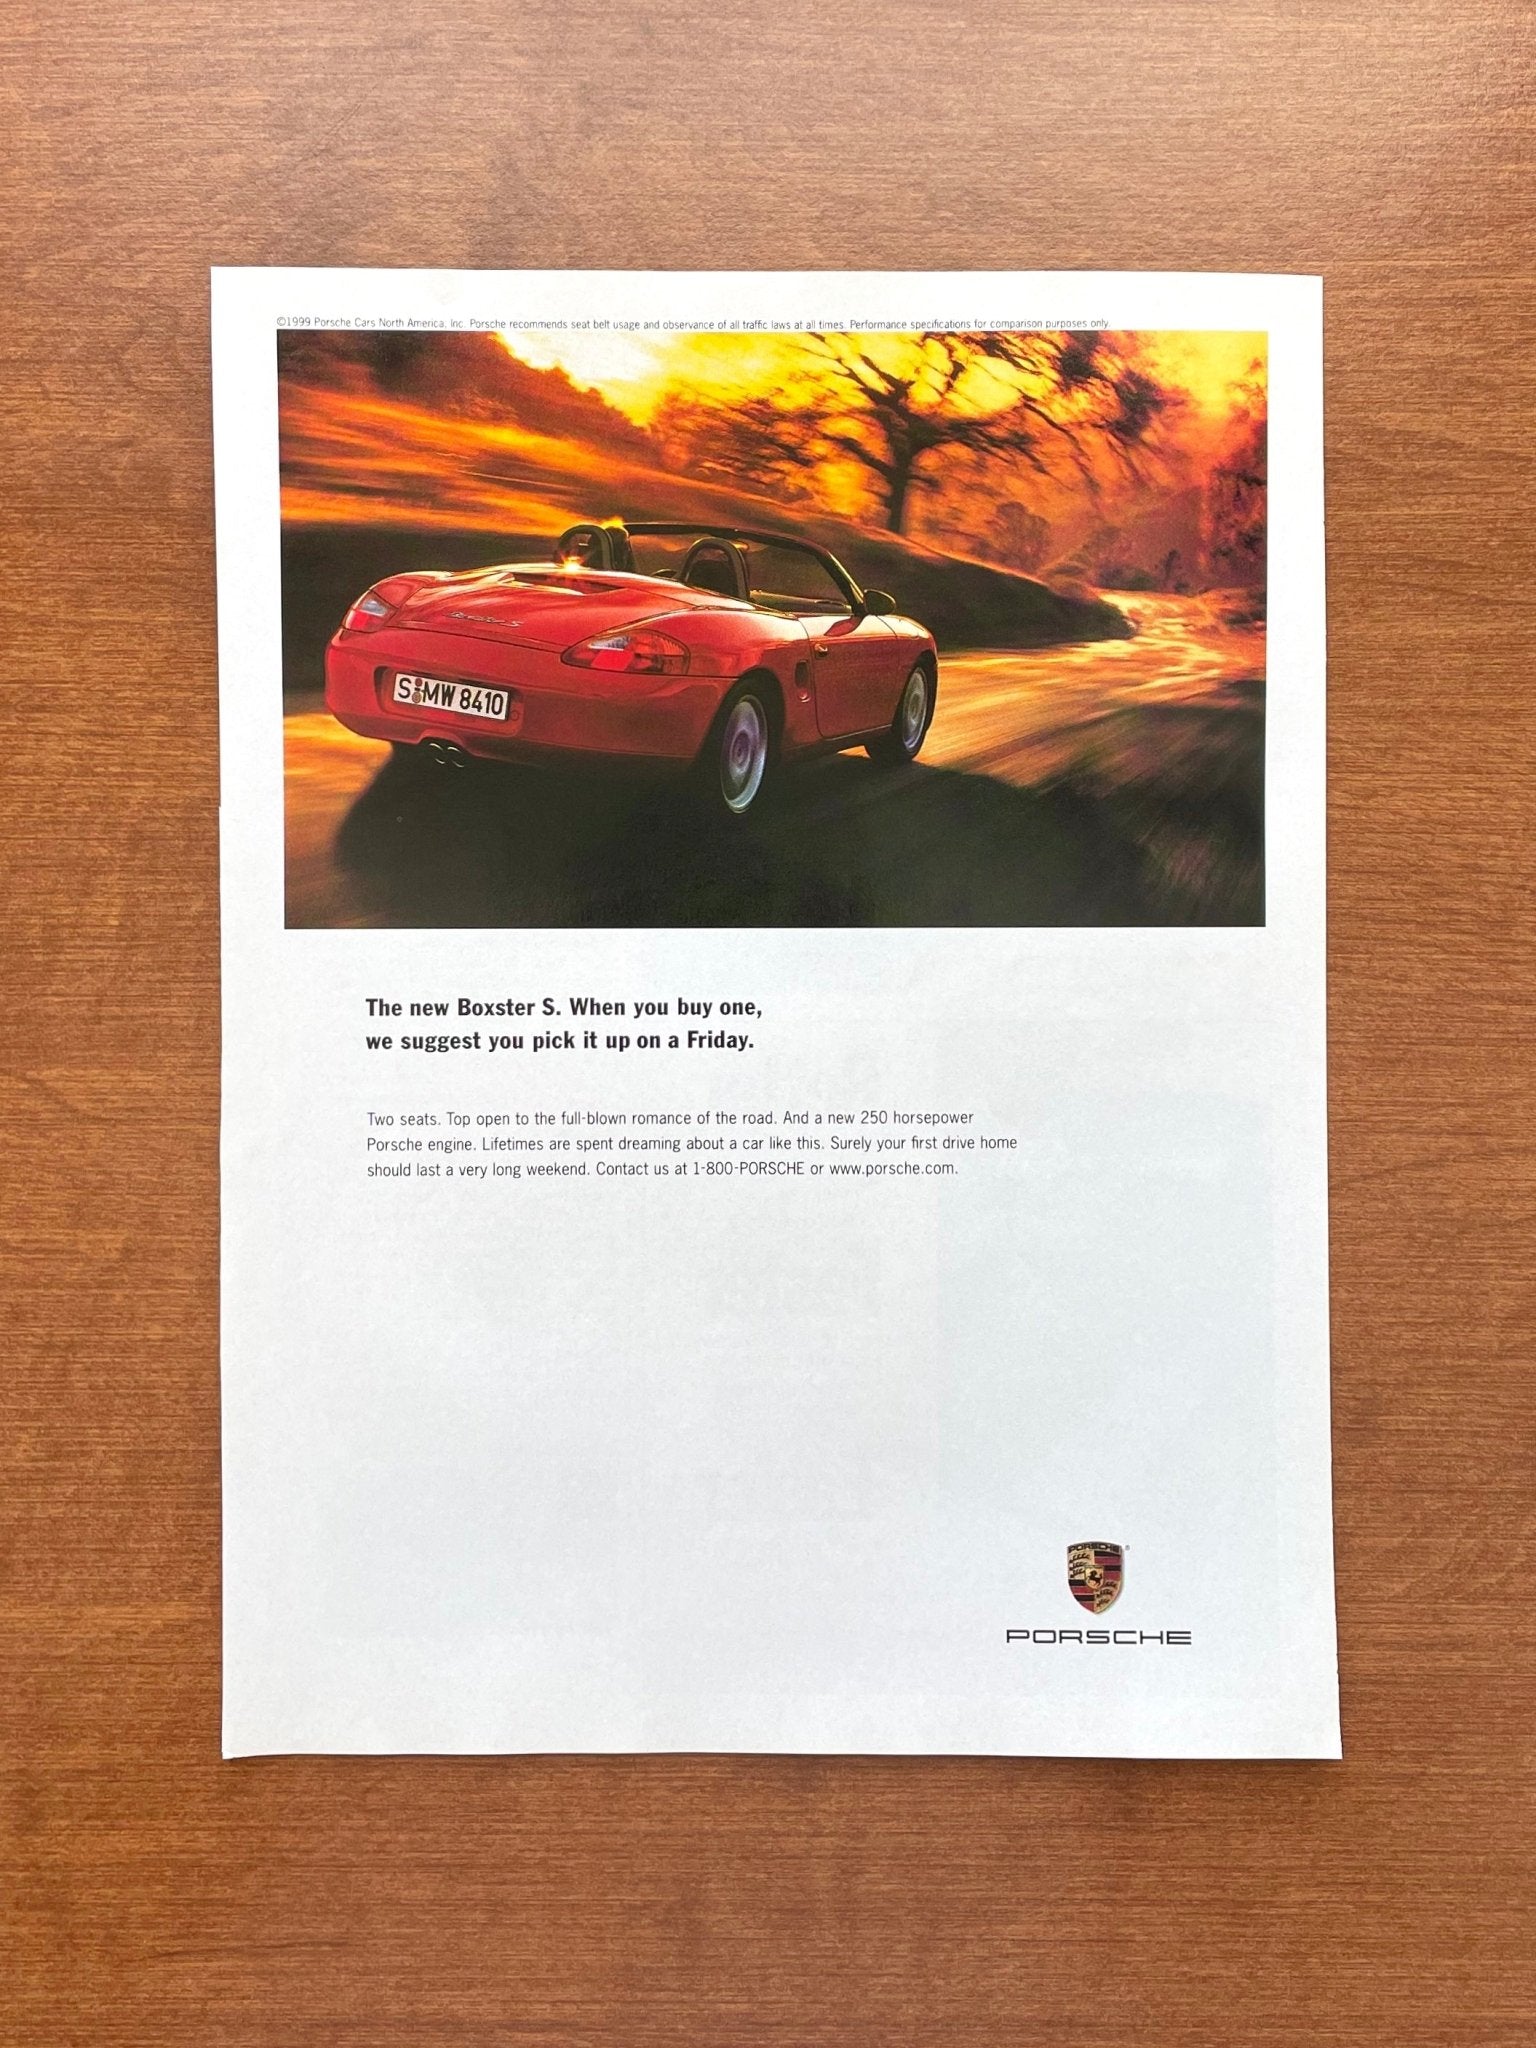 1999 Porsche Boxster S "pick it up on a Friday." Advertisement